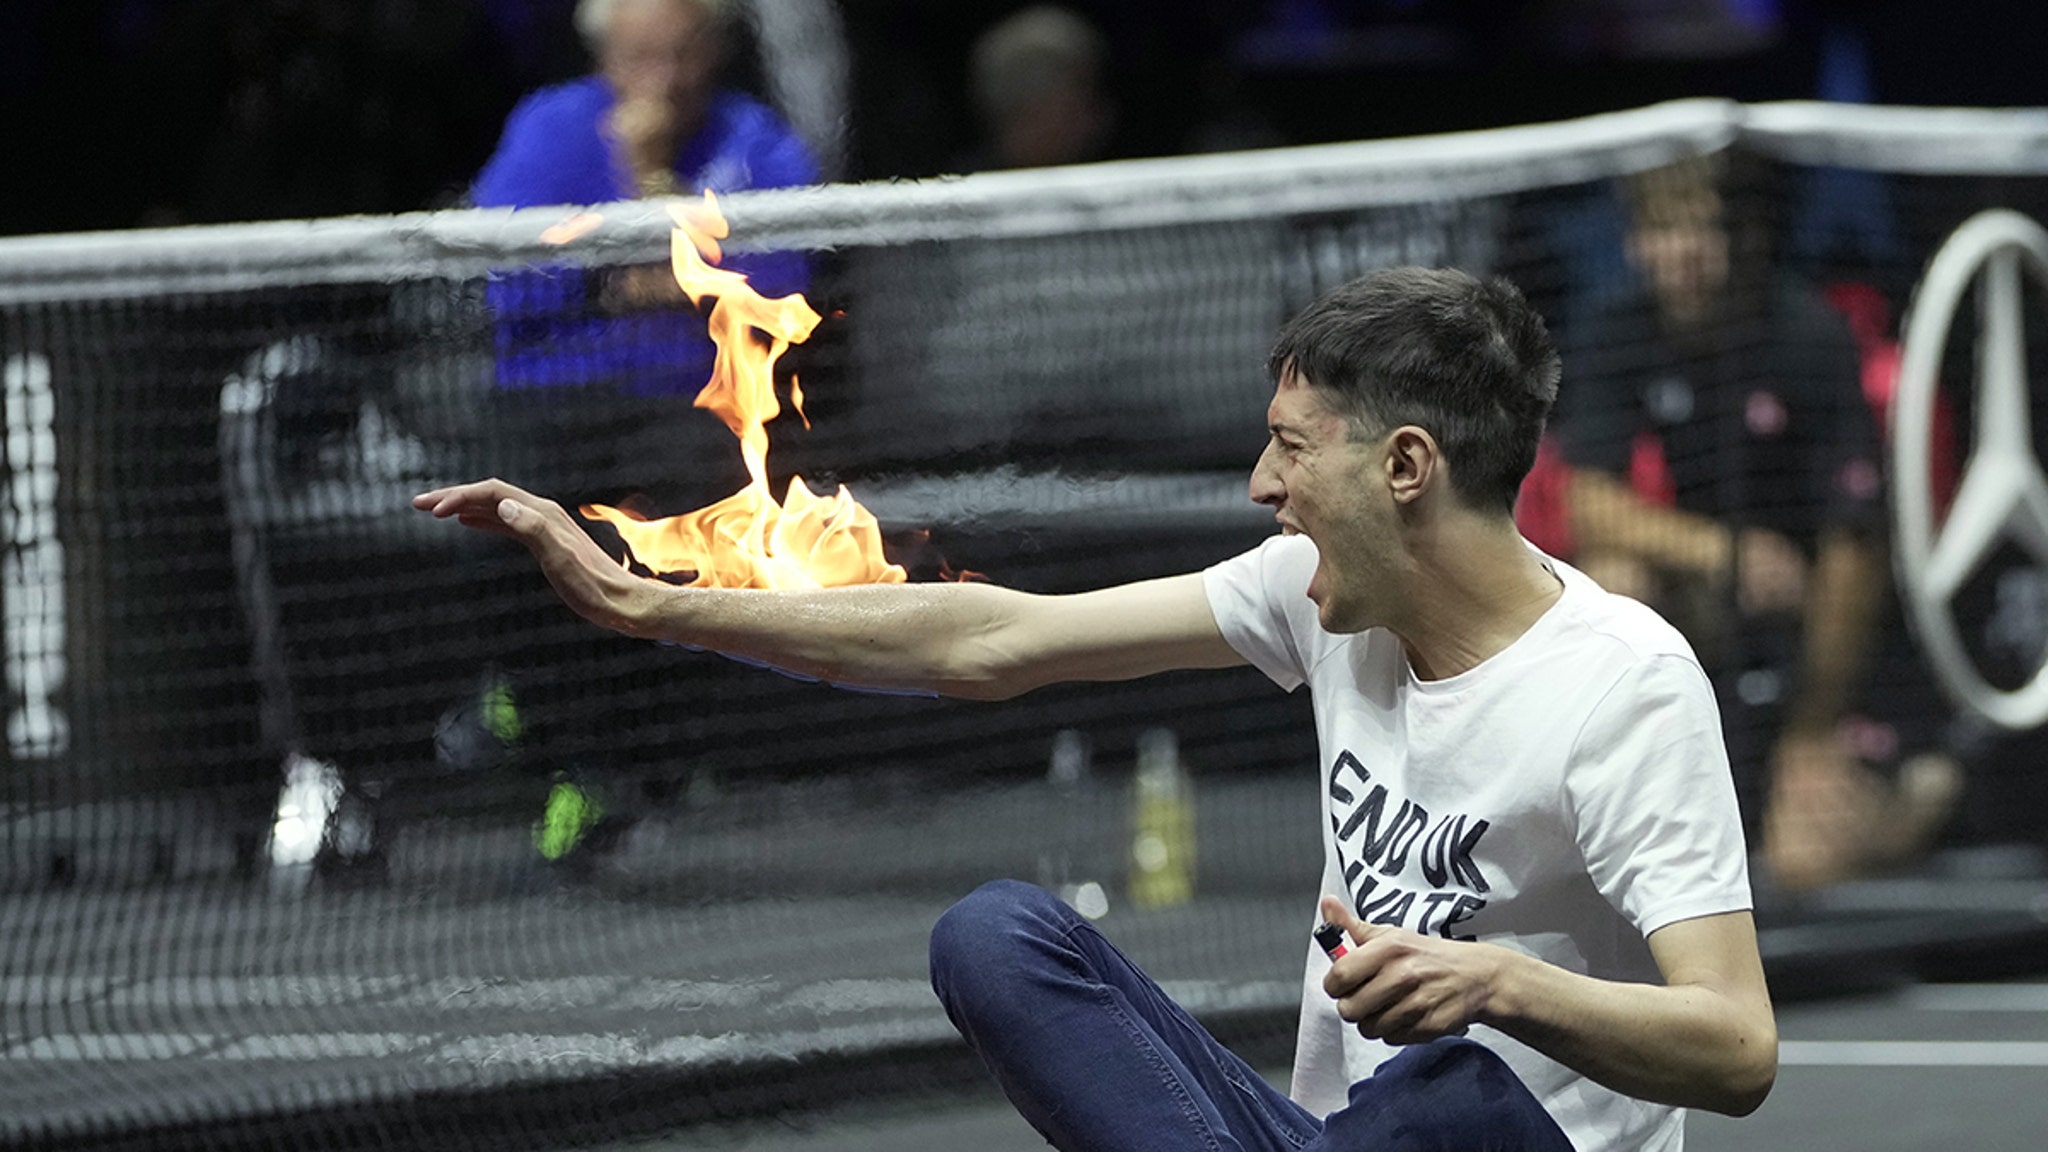 Protester Sets Arm On Fire In Wild Scene At Roger Federer's Last Tournament